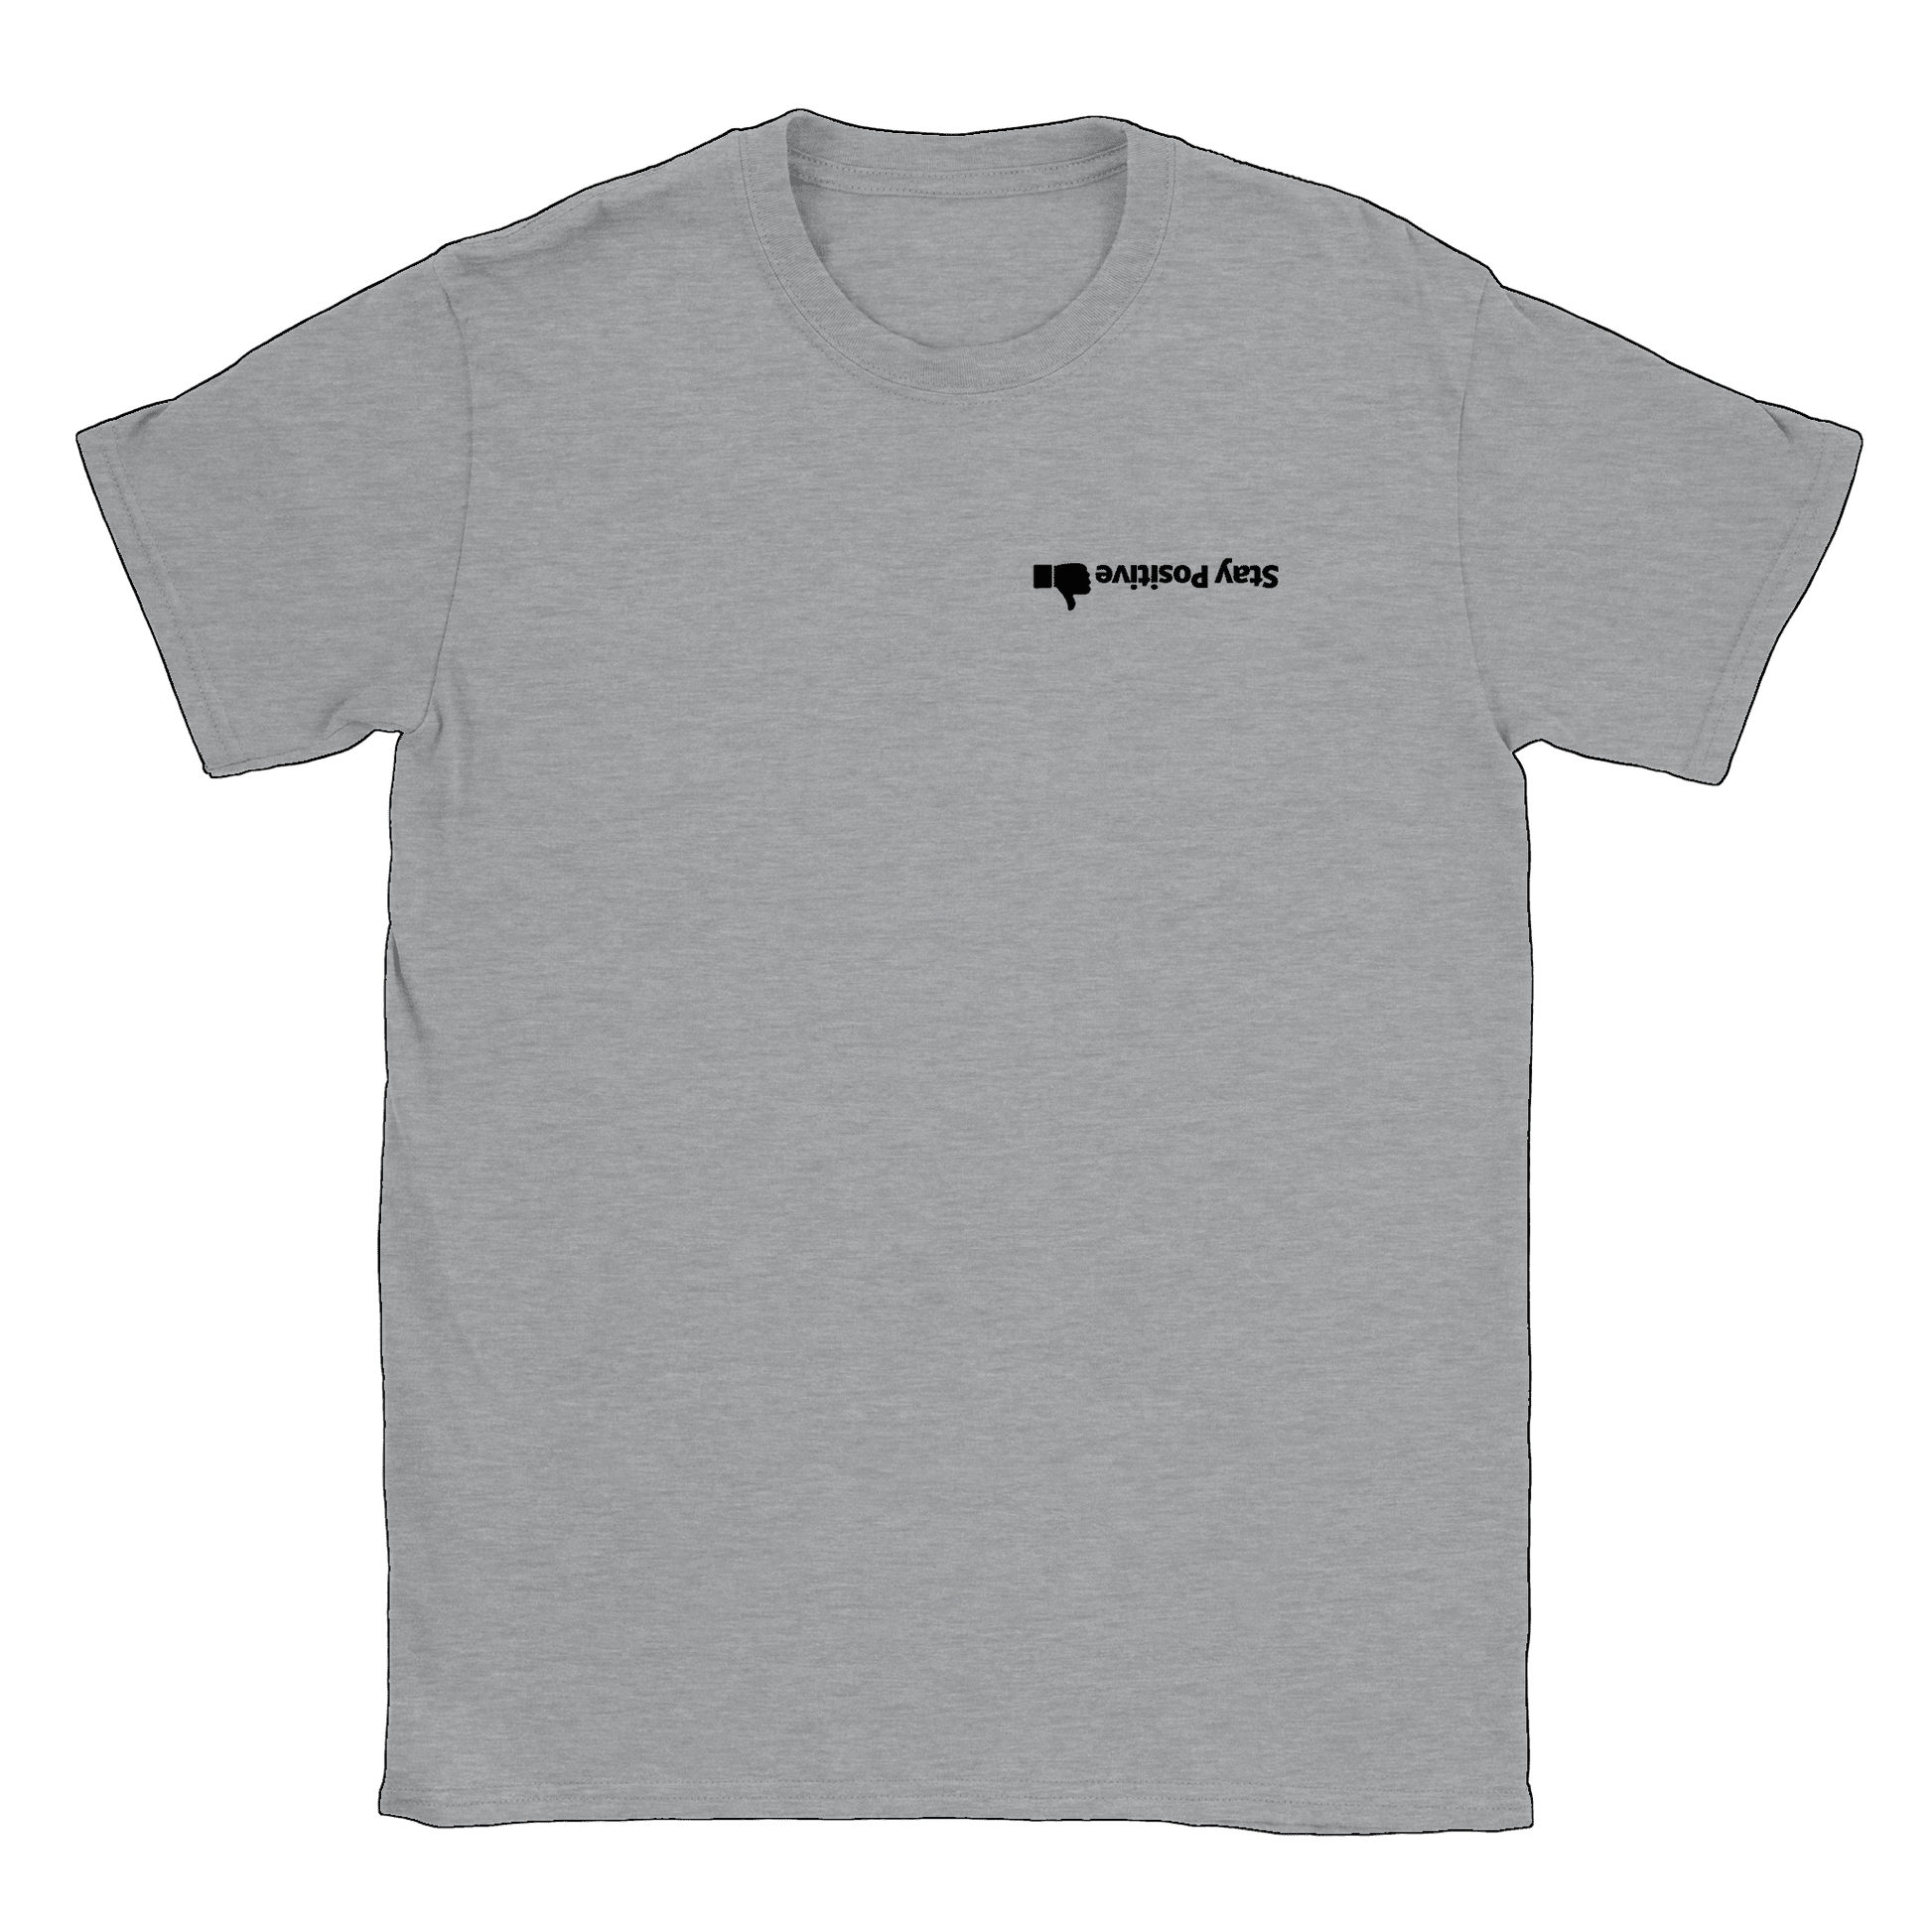 Stay Positive - T-shirt Sports Grey